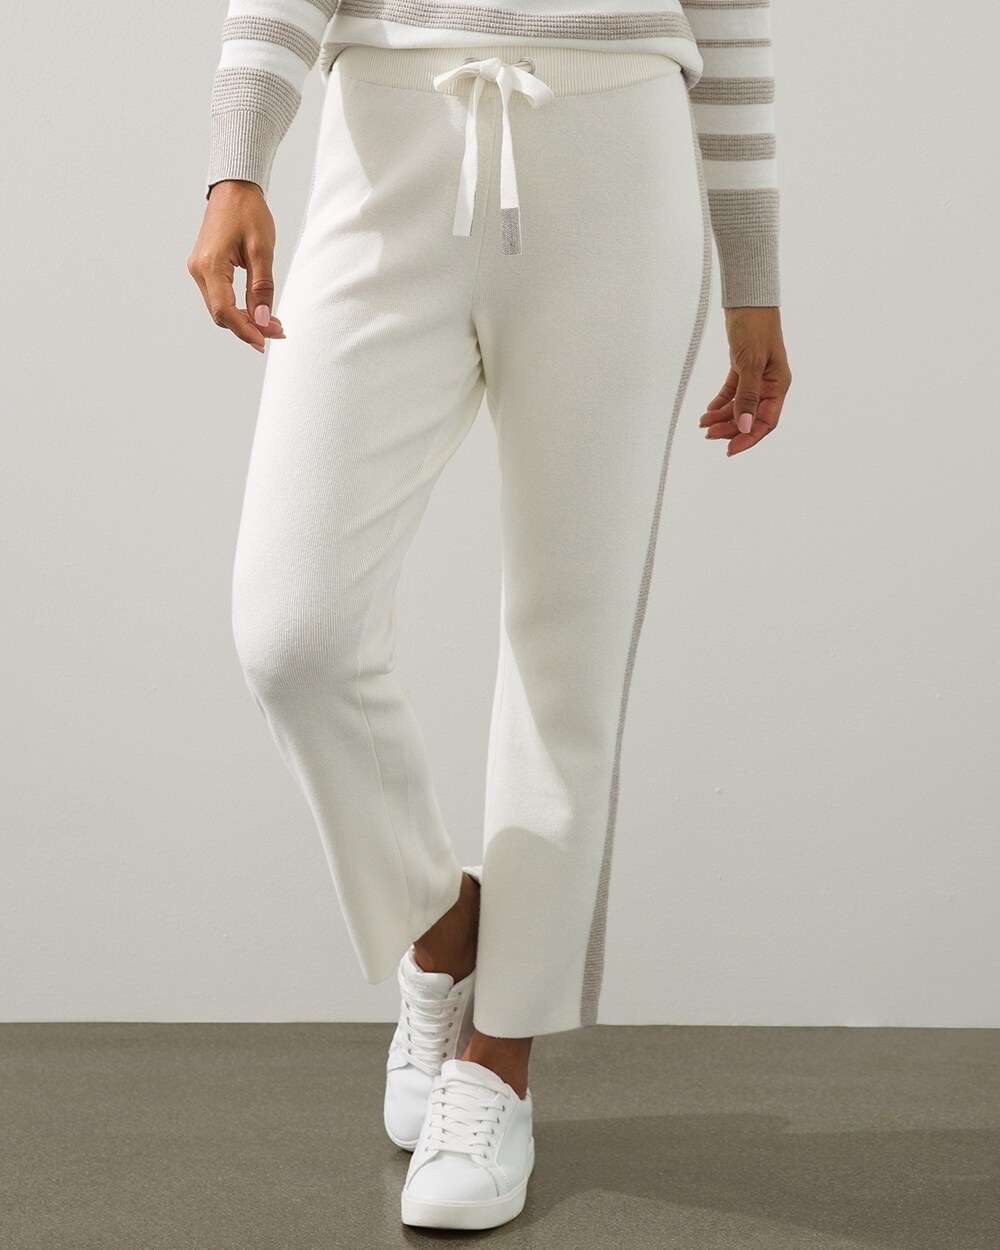 Chicos Winter White Pants Shop Cheapest